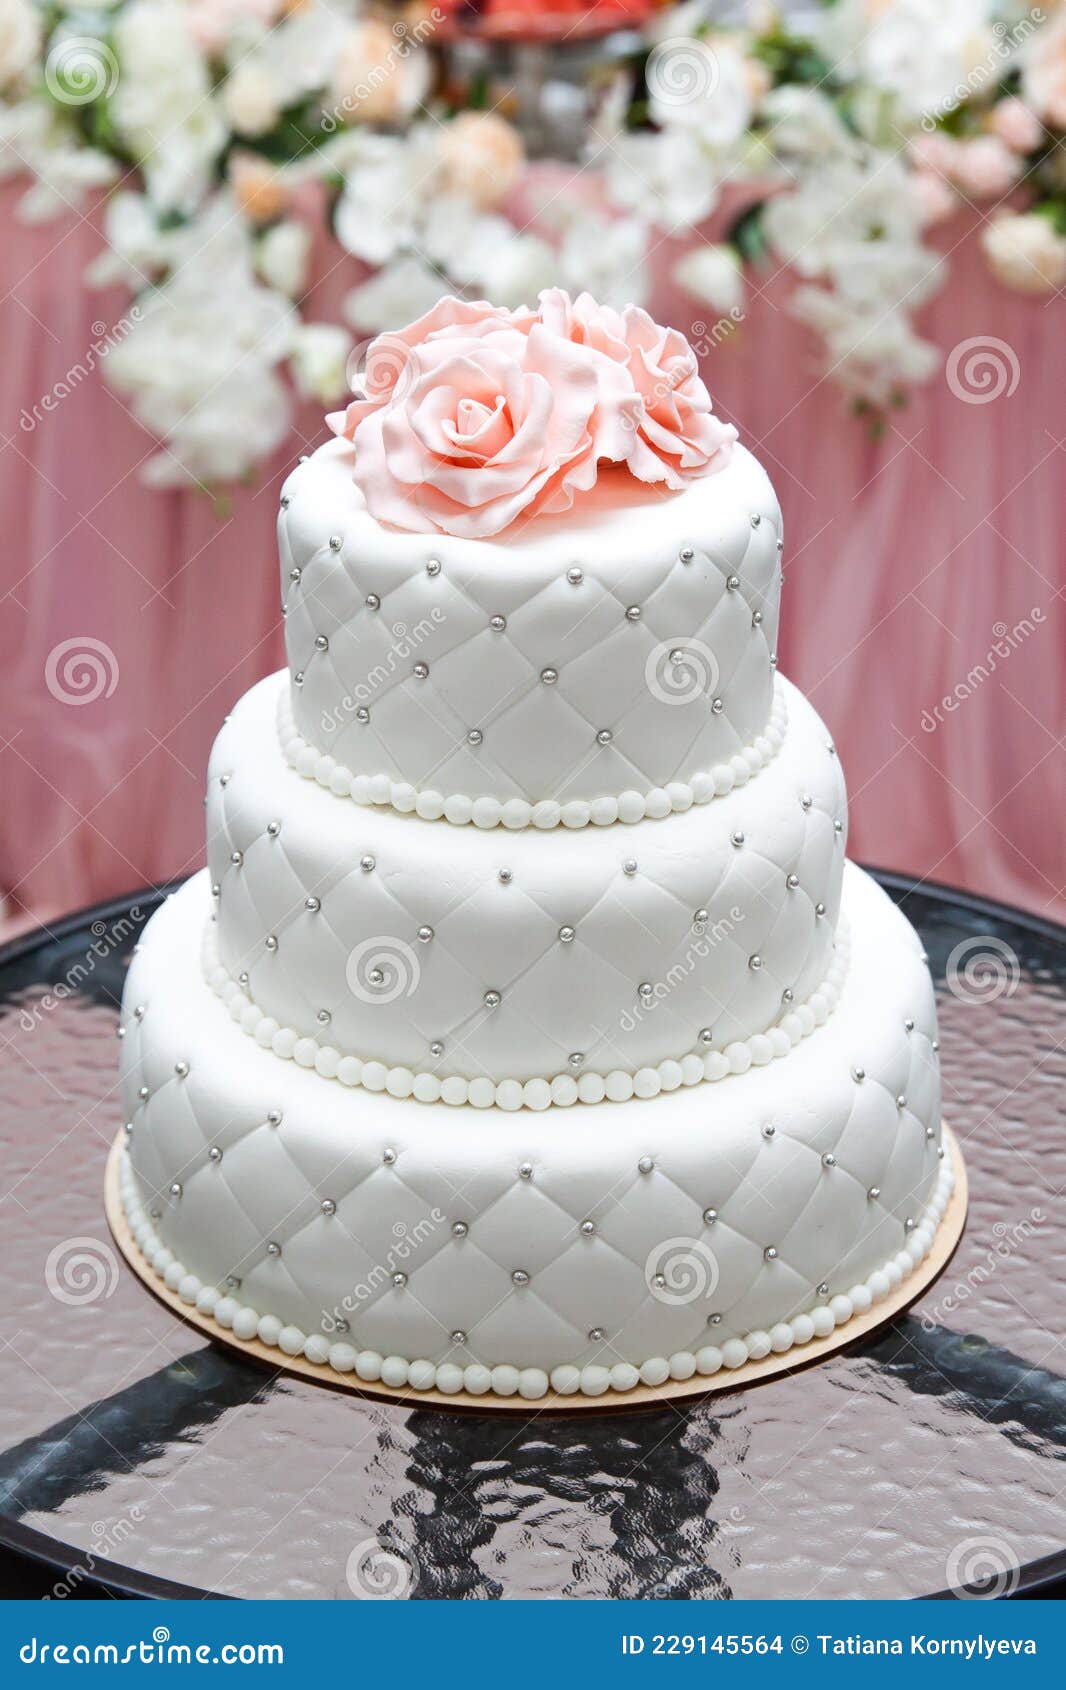 A Multi Level White Wedding Cake and Pink Flowers on Top. Big Cake ...